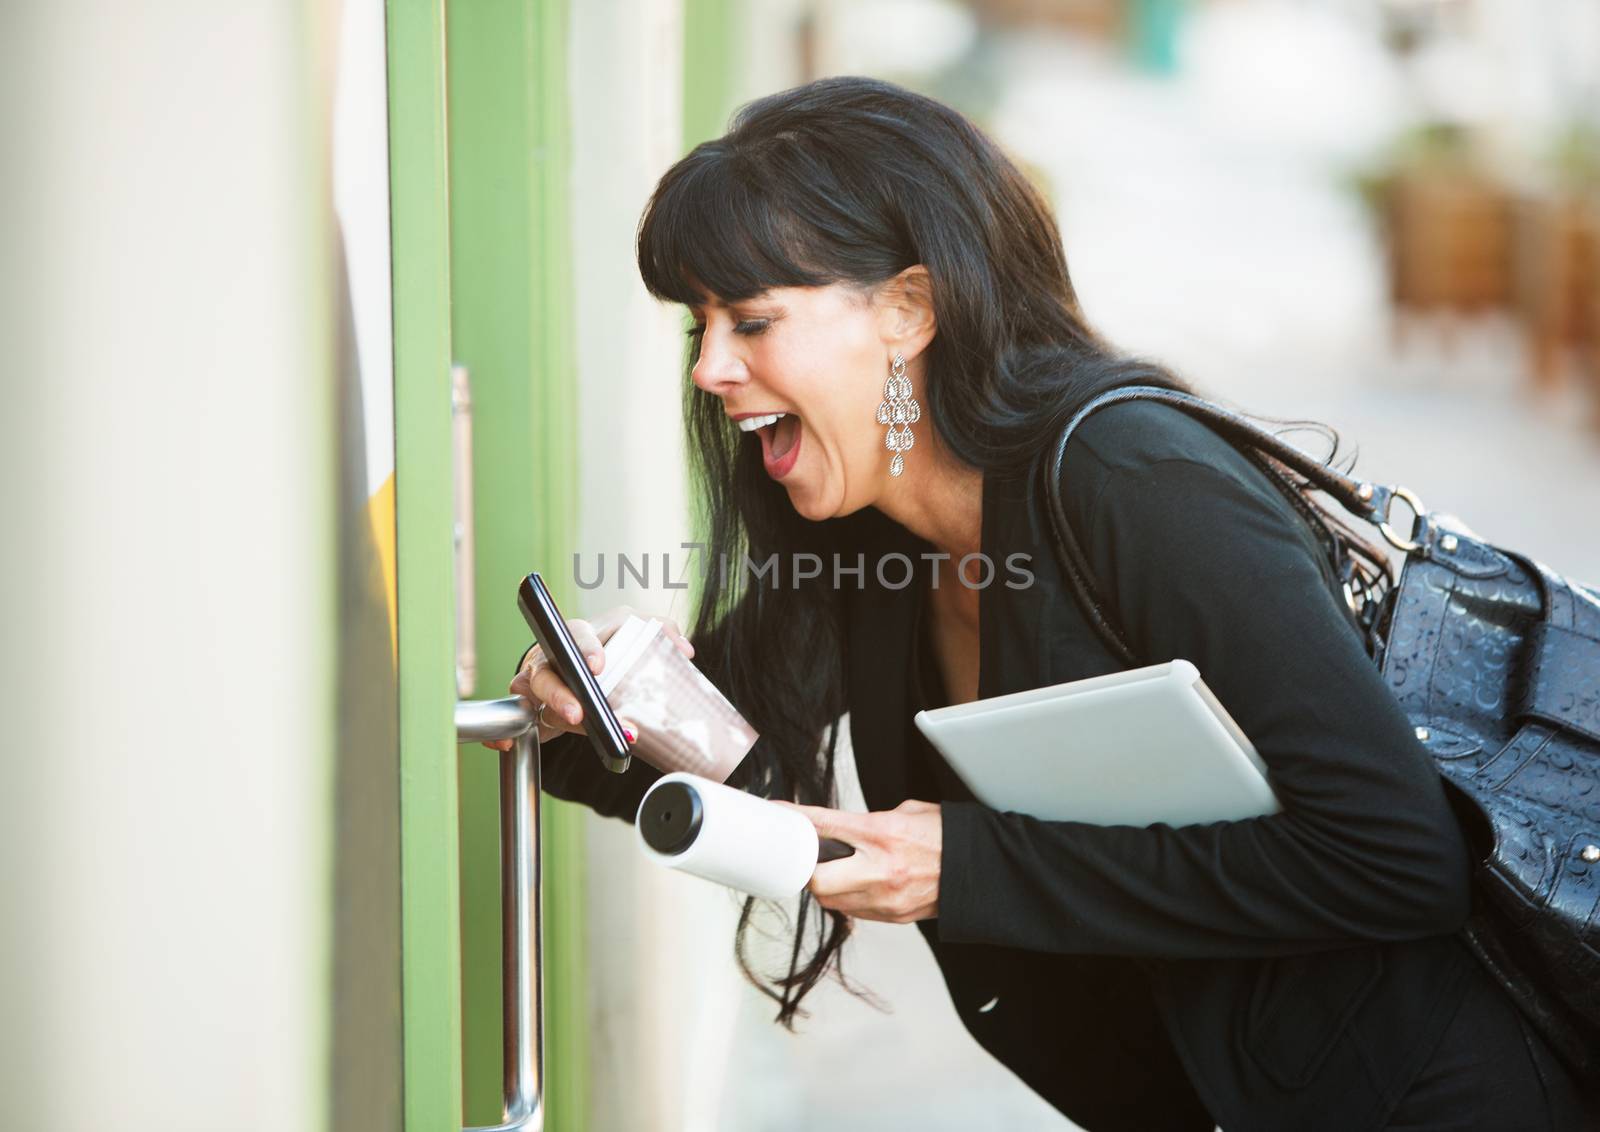 Attractive woman with her hands full attempting to open a door